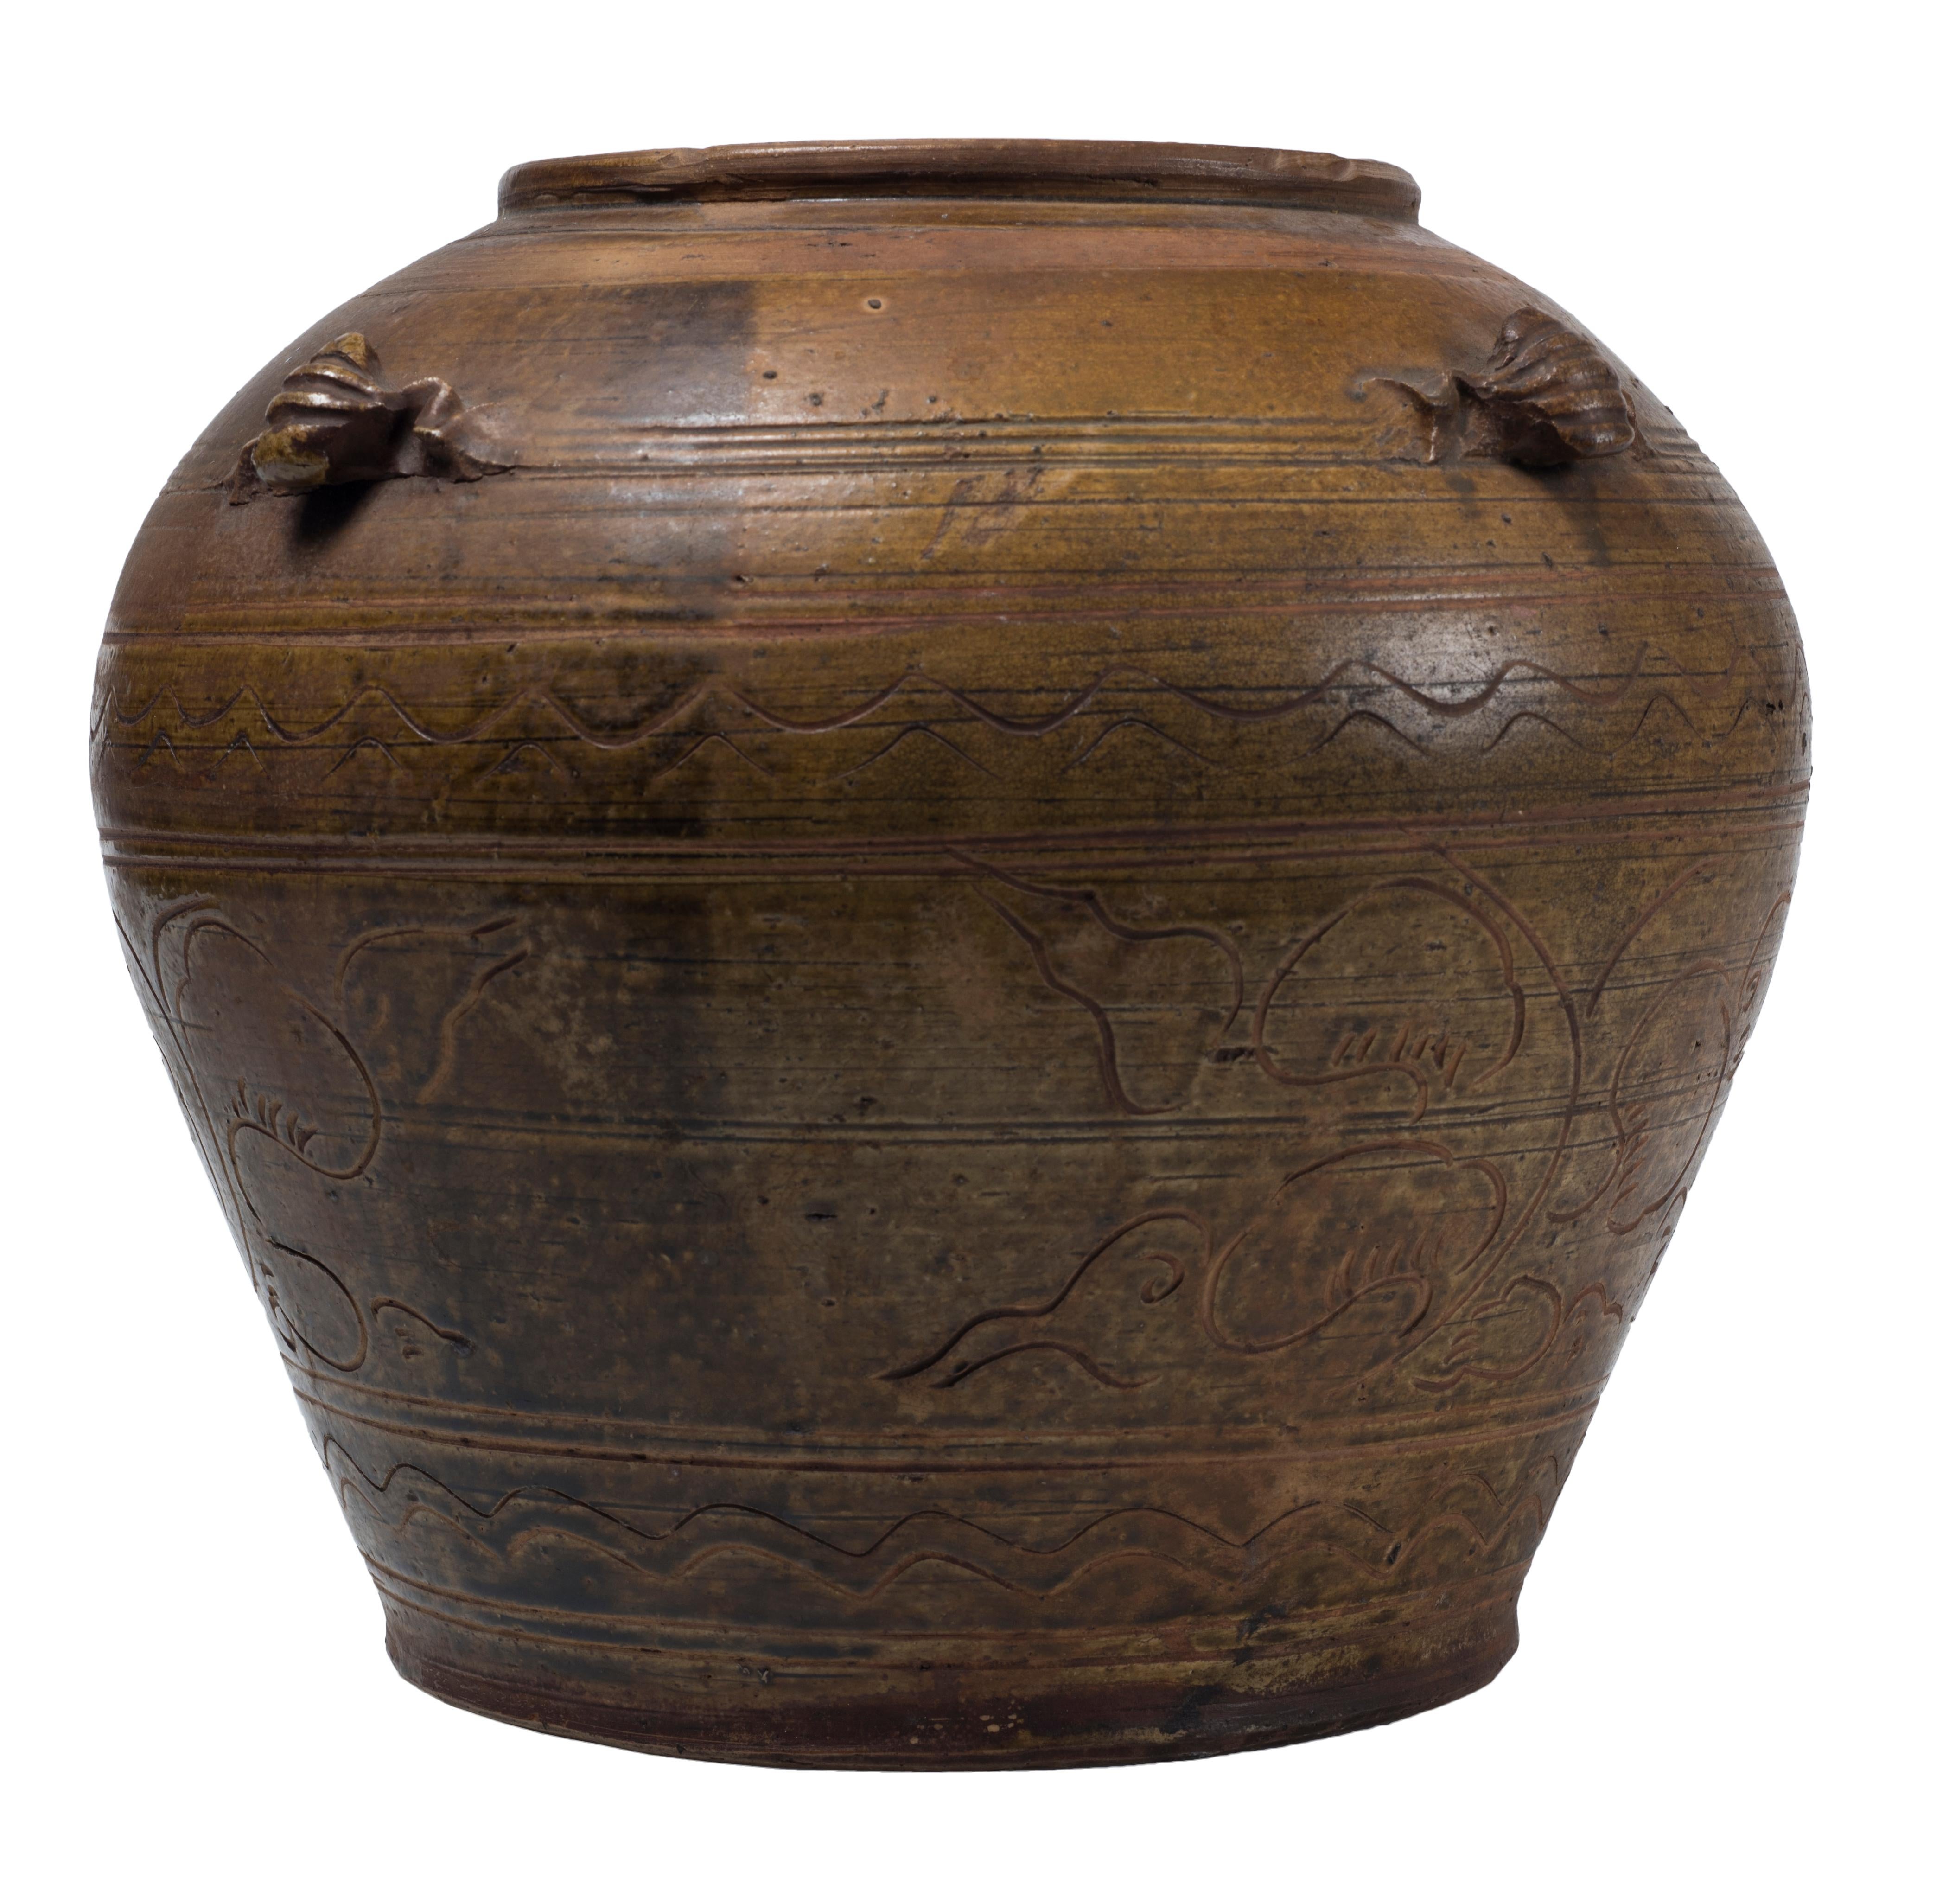 Vintage jar is an original large terracotta jar by oriental manufacture and realized at the end of 18th century.

Includes 4 small insect-shaped handles. The surface is engraved and decorated with naturalistic motifs. 

This object is shipped